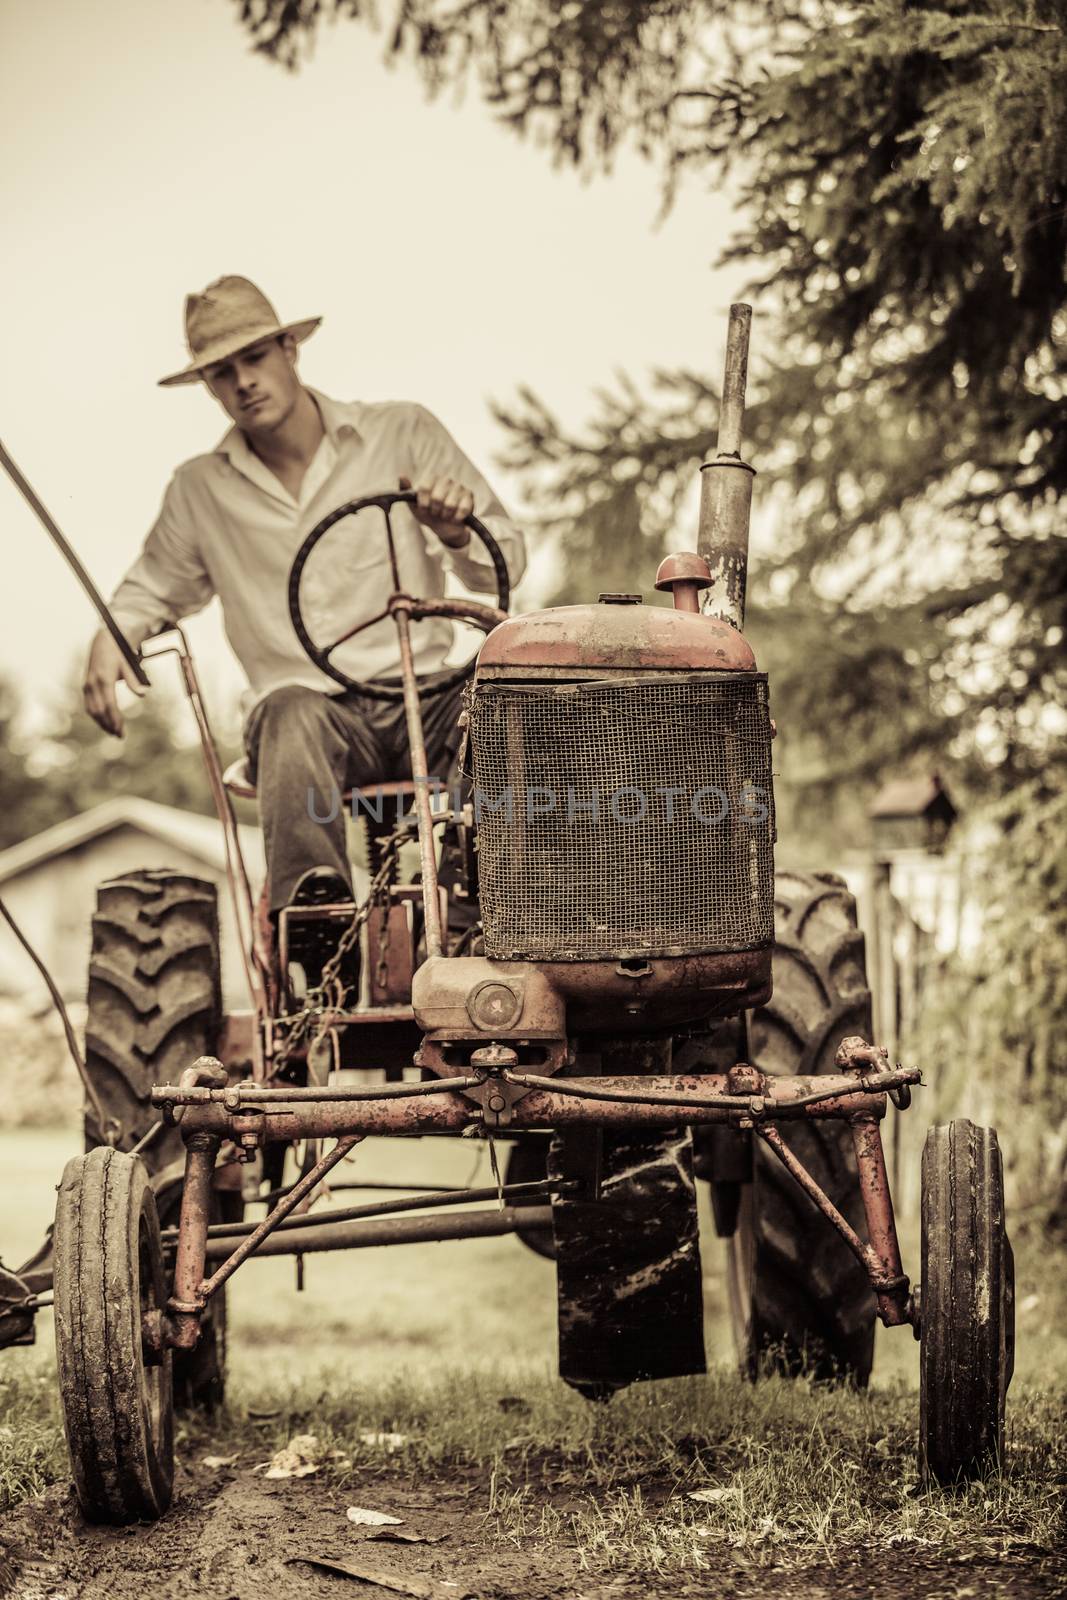 Young Farmer on a Vintage Tractor by aetb